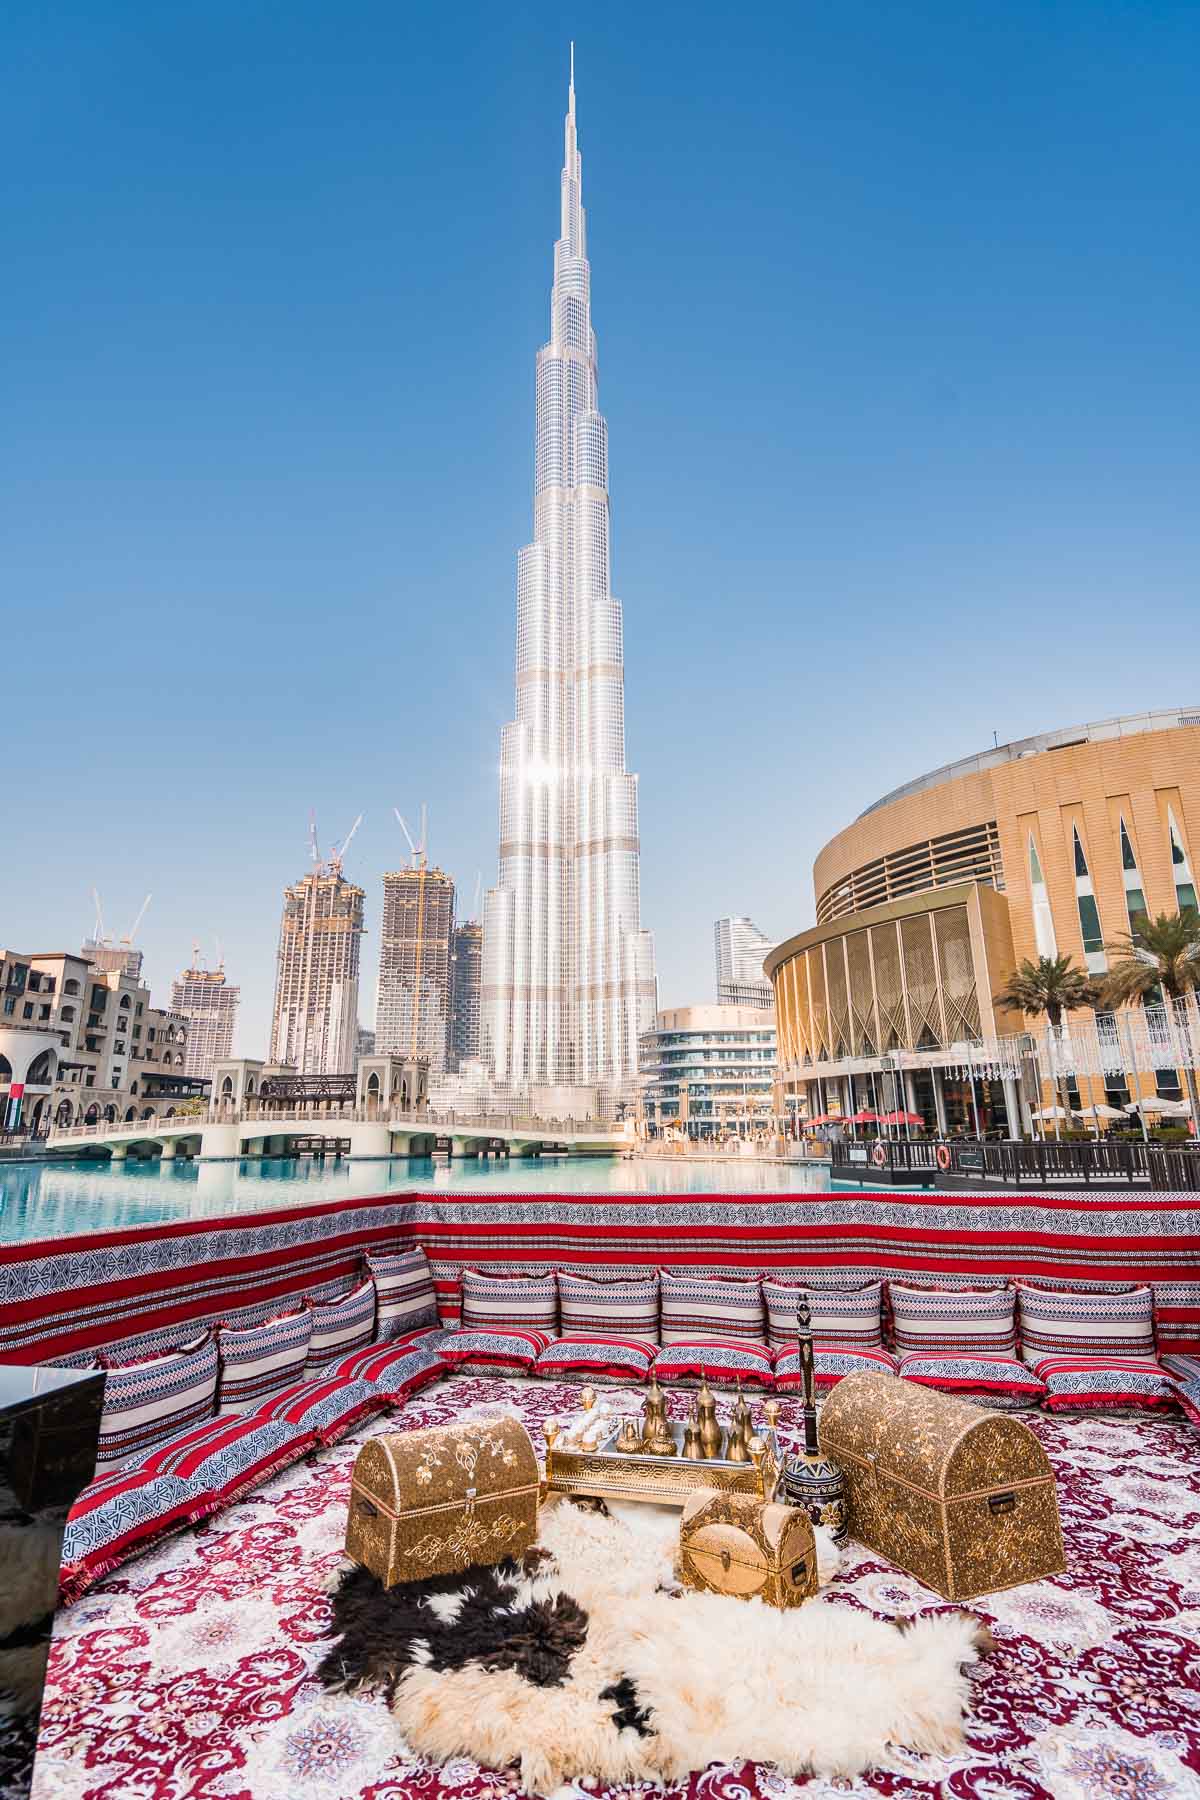 Photo spot designed in Arabic style with the Burj Khalifa in the background